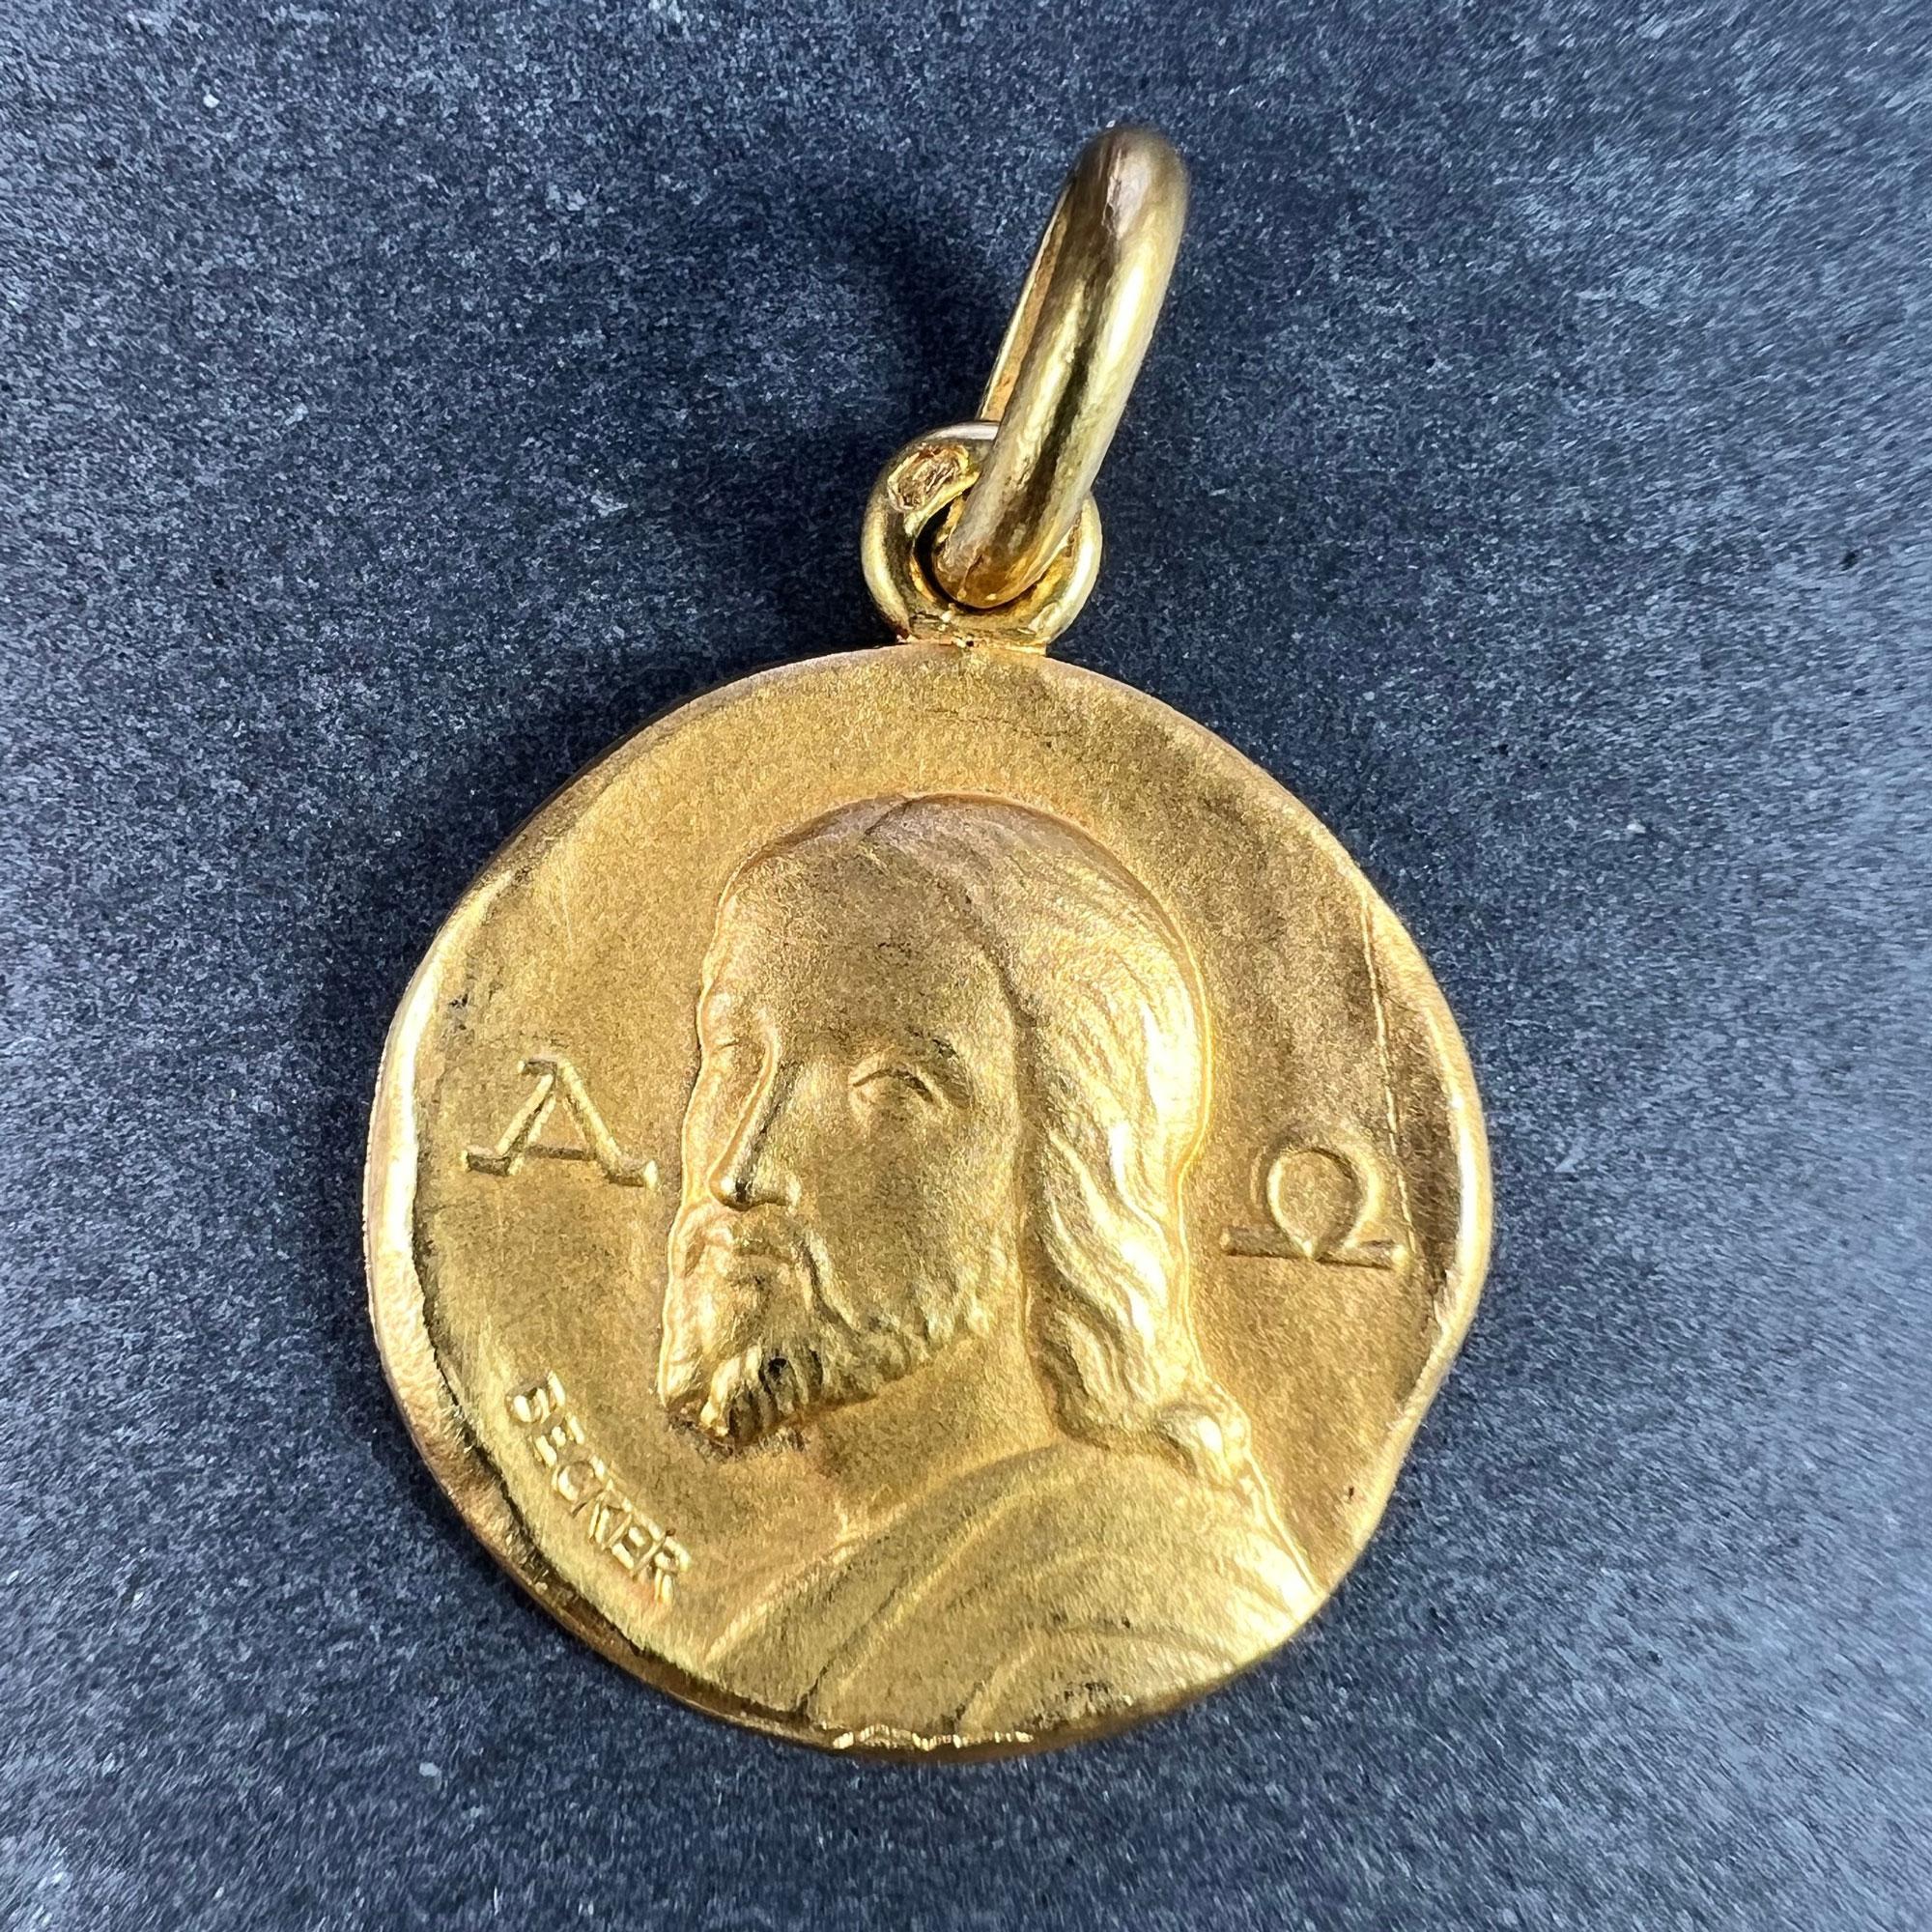 A French 18 karat (18K) yellow gold charm pendant designed as a round medal depicting Jesus Christ with the symbols for Alpha and Omega to either side. Signed Becker, stamped with the eagle’s head for 18 karat gold and French manufacture, along with